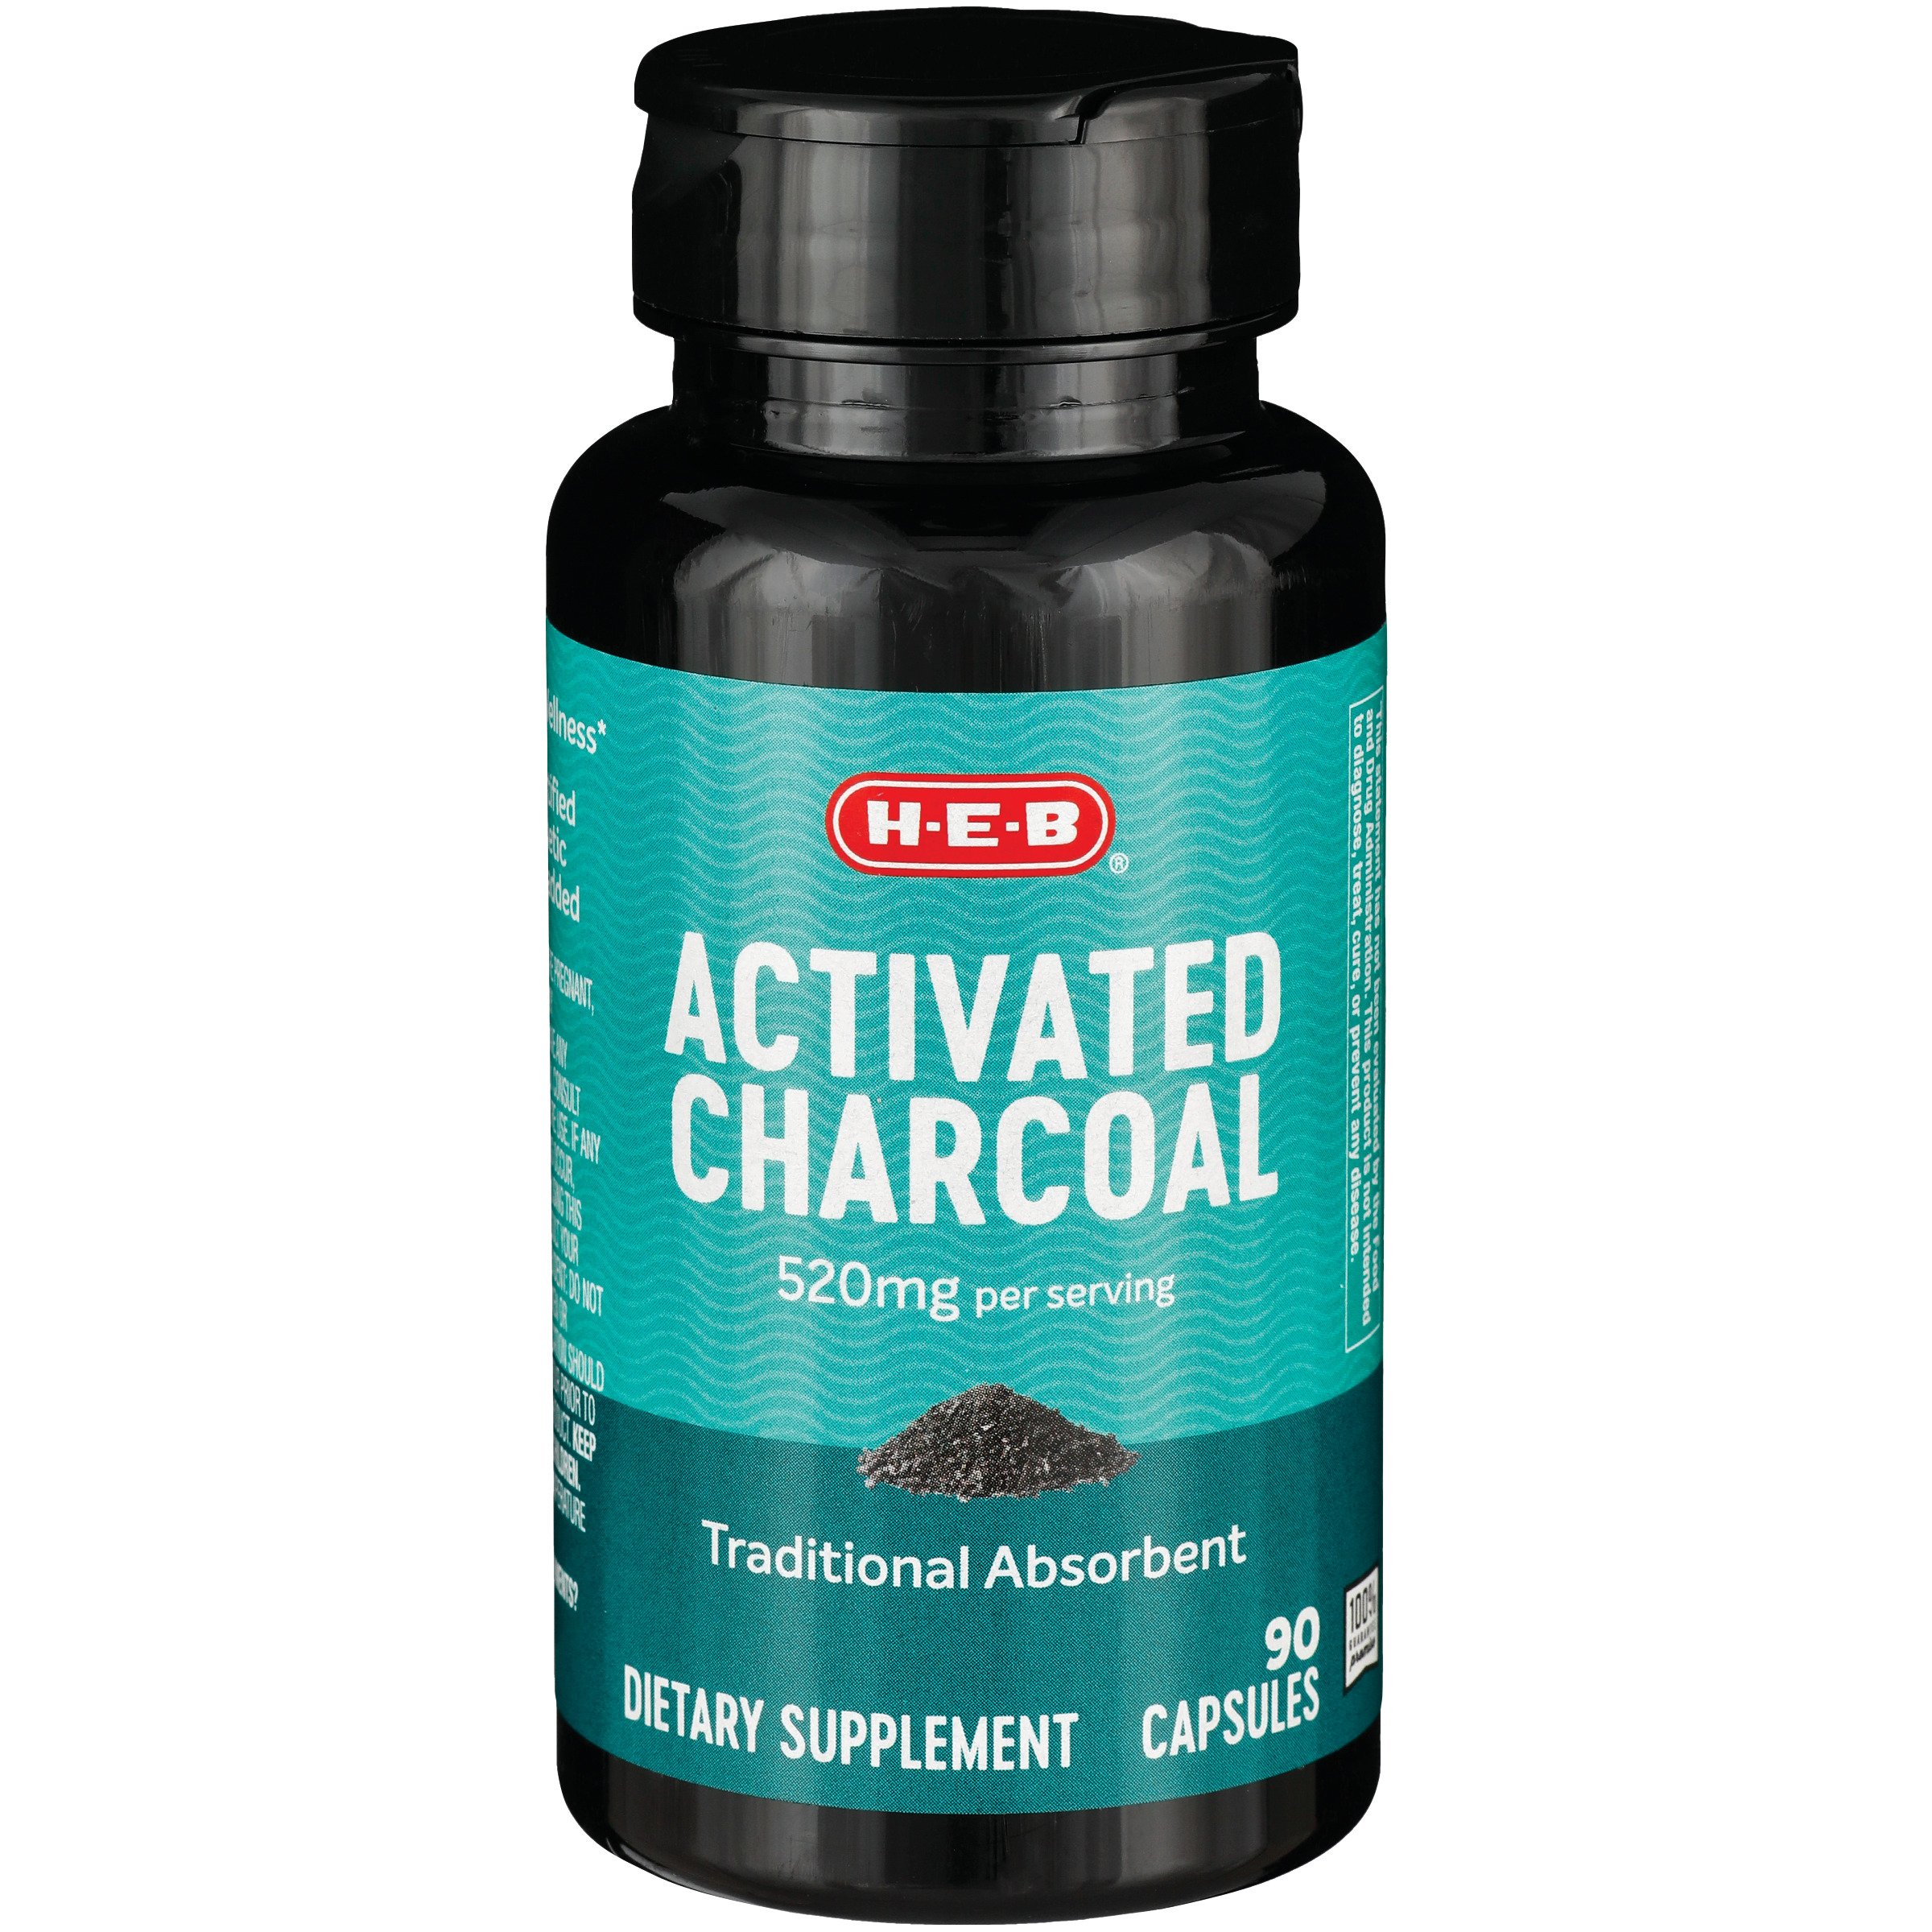 H-E-B Activated Charcoal Dietary Supplement Capsules - 520 mg - Shop Vitamins & Supplements at H-E-B